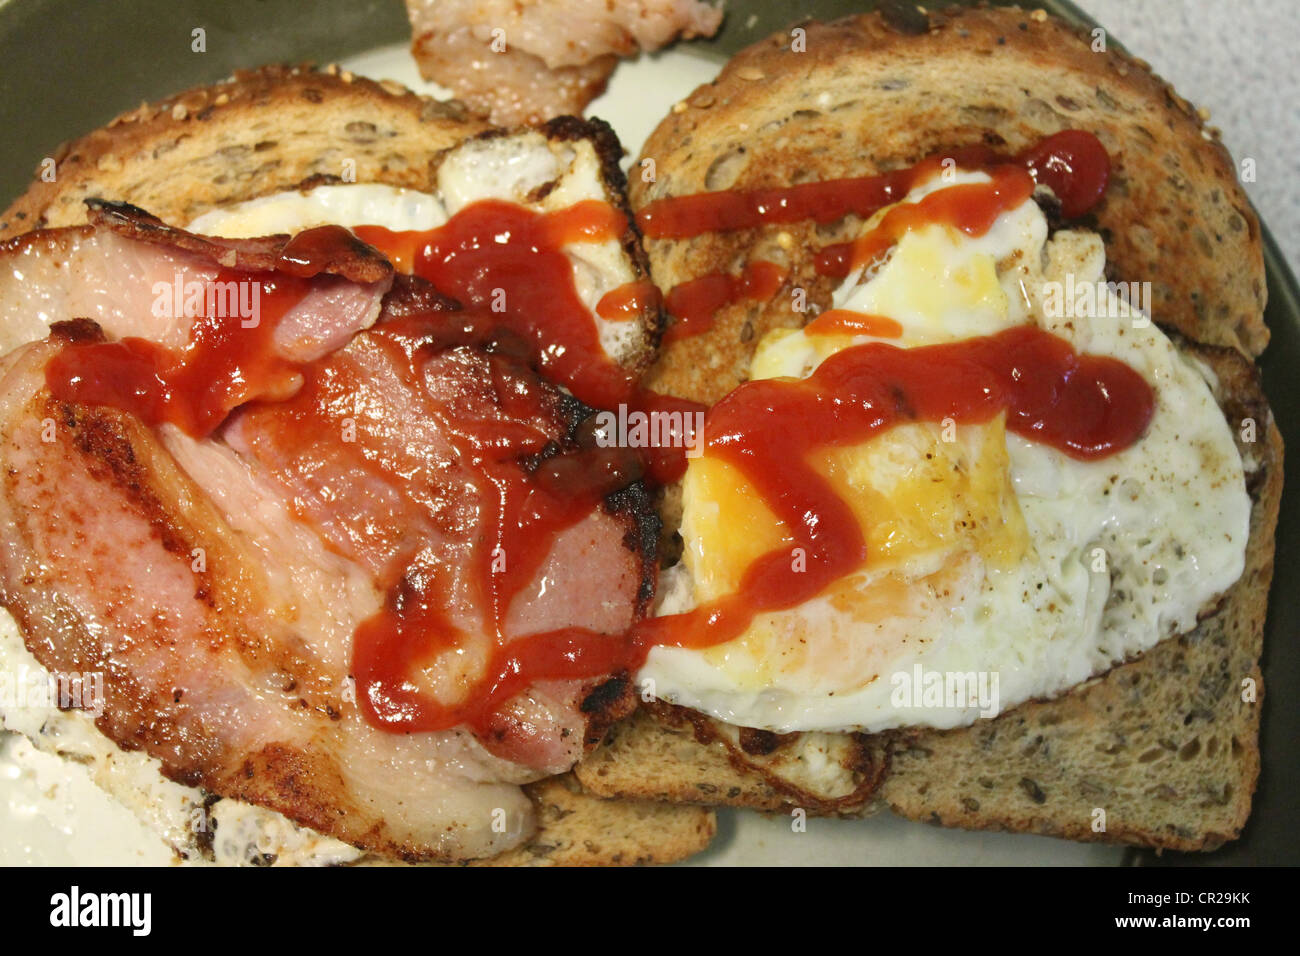 Fried breakfast of fried eggs and bacon with ketchup Stock Photo